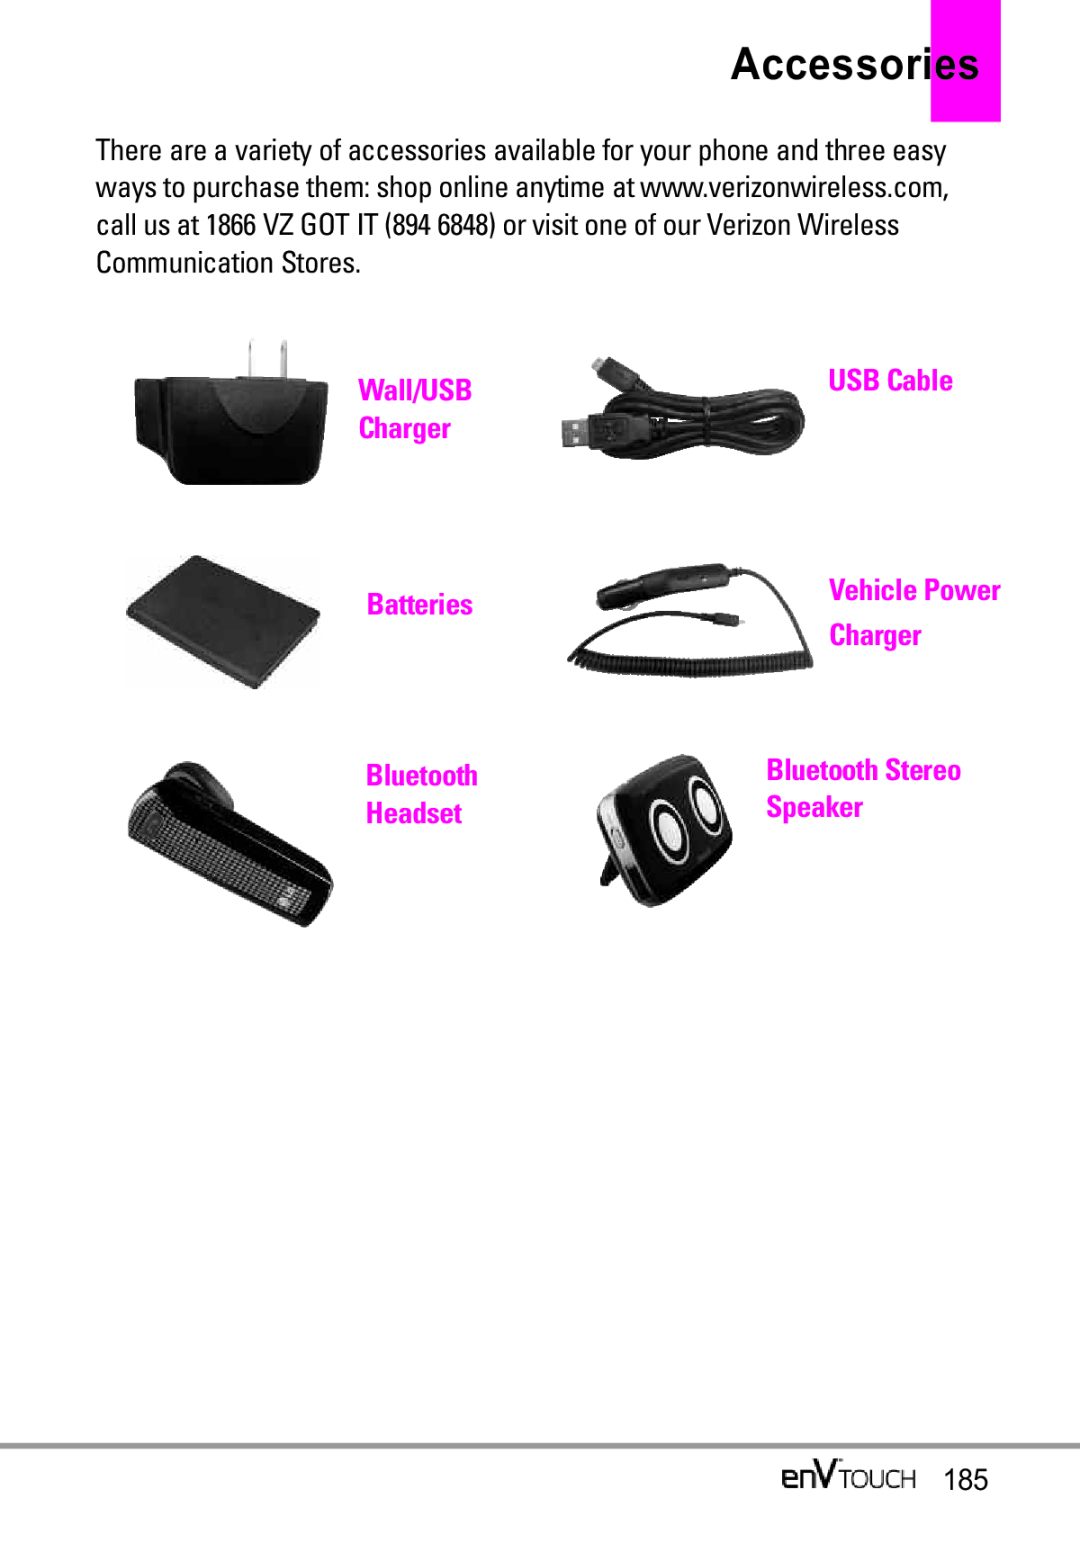 LG Electronics MMBB0332901 manual Accessories, Wall/USB, USB Cable, Charger, Batteries, Bluetooth, Headset, Speaker 